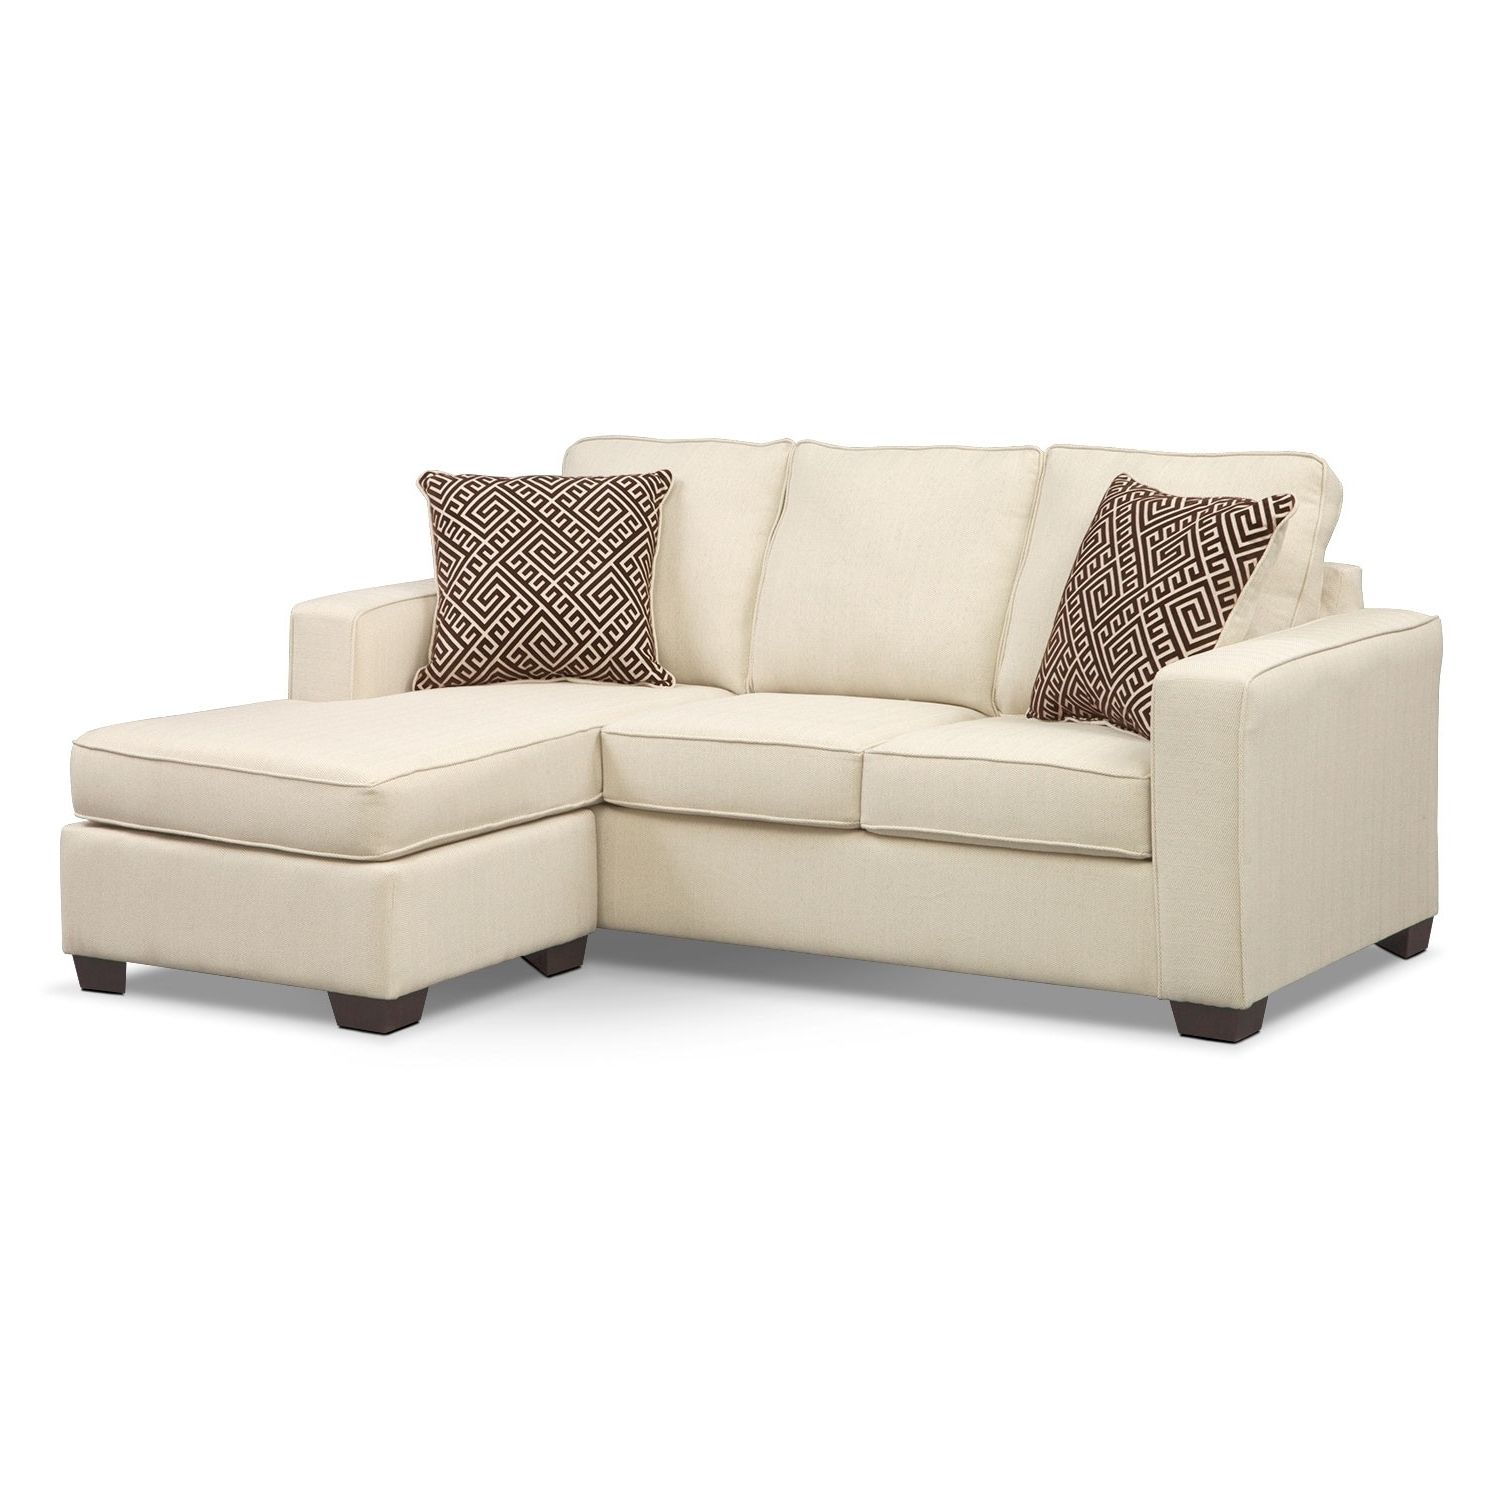 Chaise Sleeper Sofas Within 2017 Sterling Memory Foam Sleeper Sofa With Chaise – Beige (View 12 of 15)